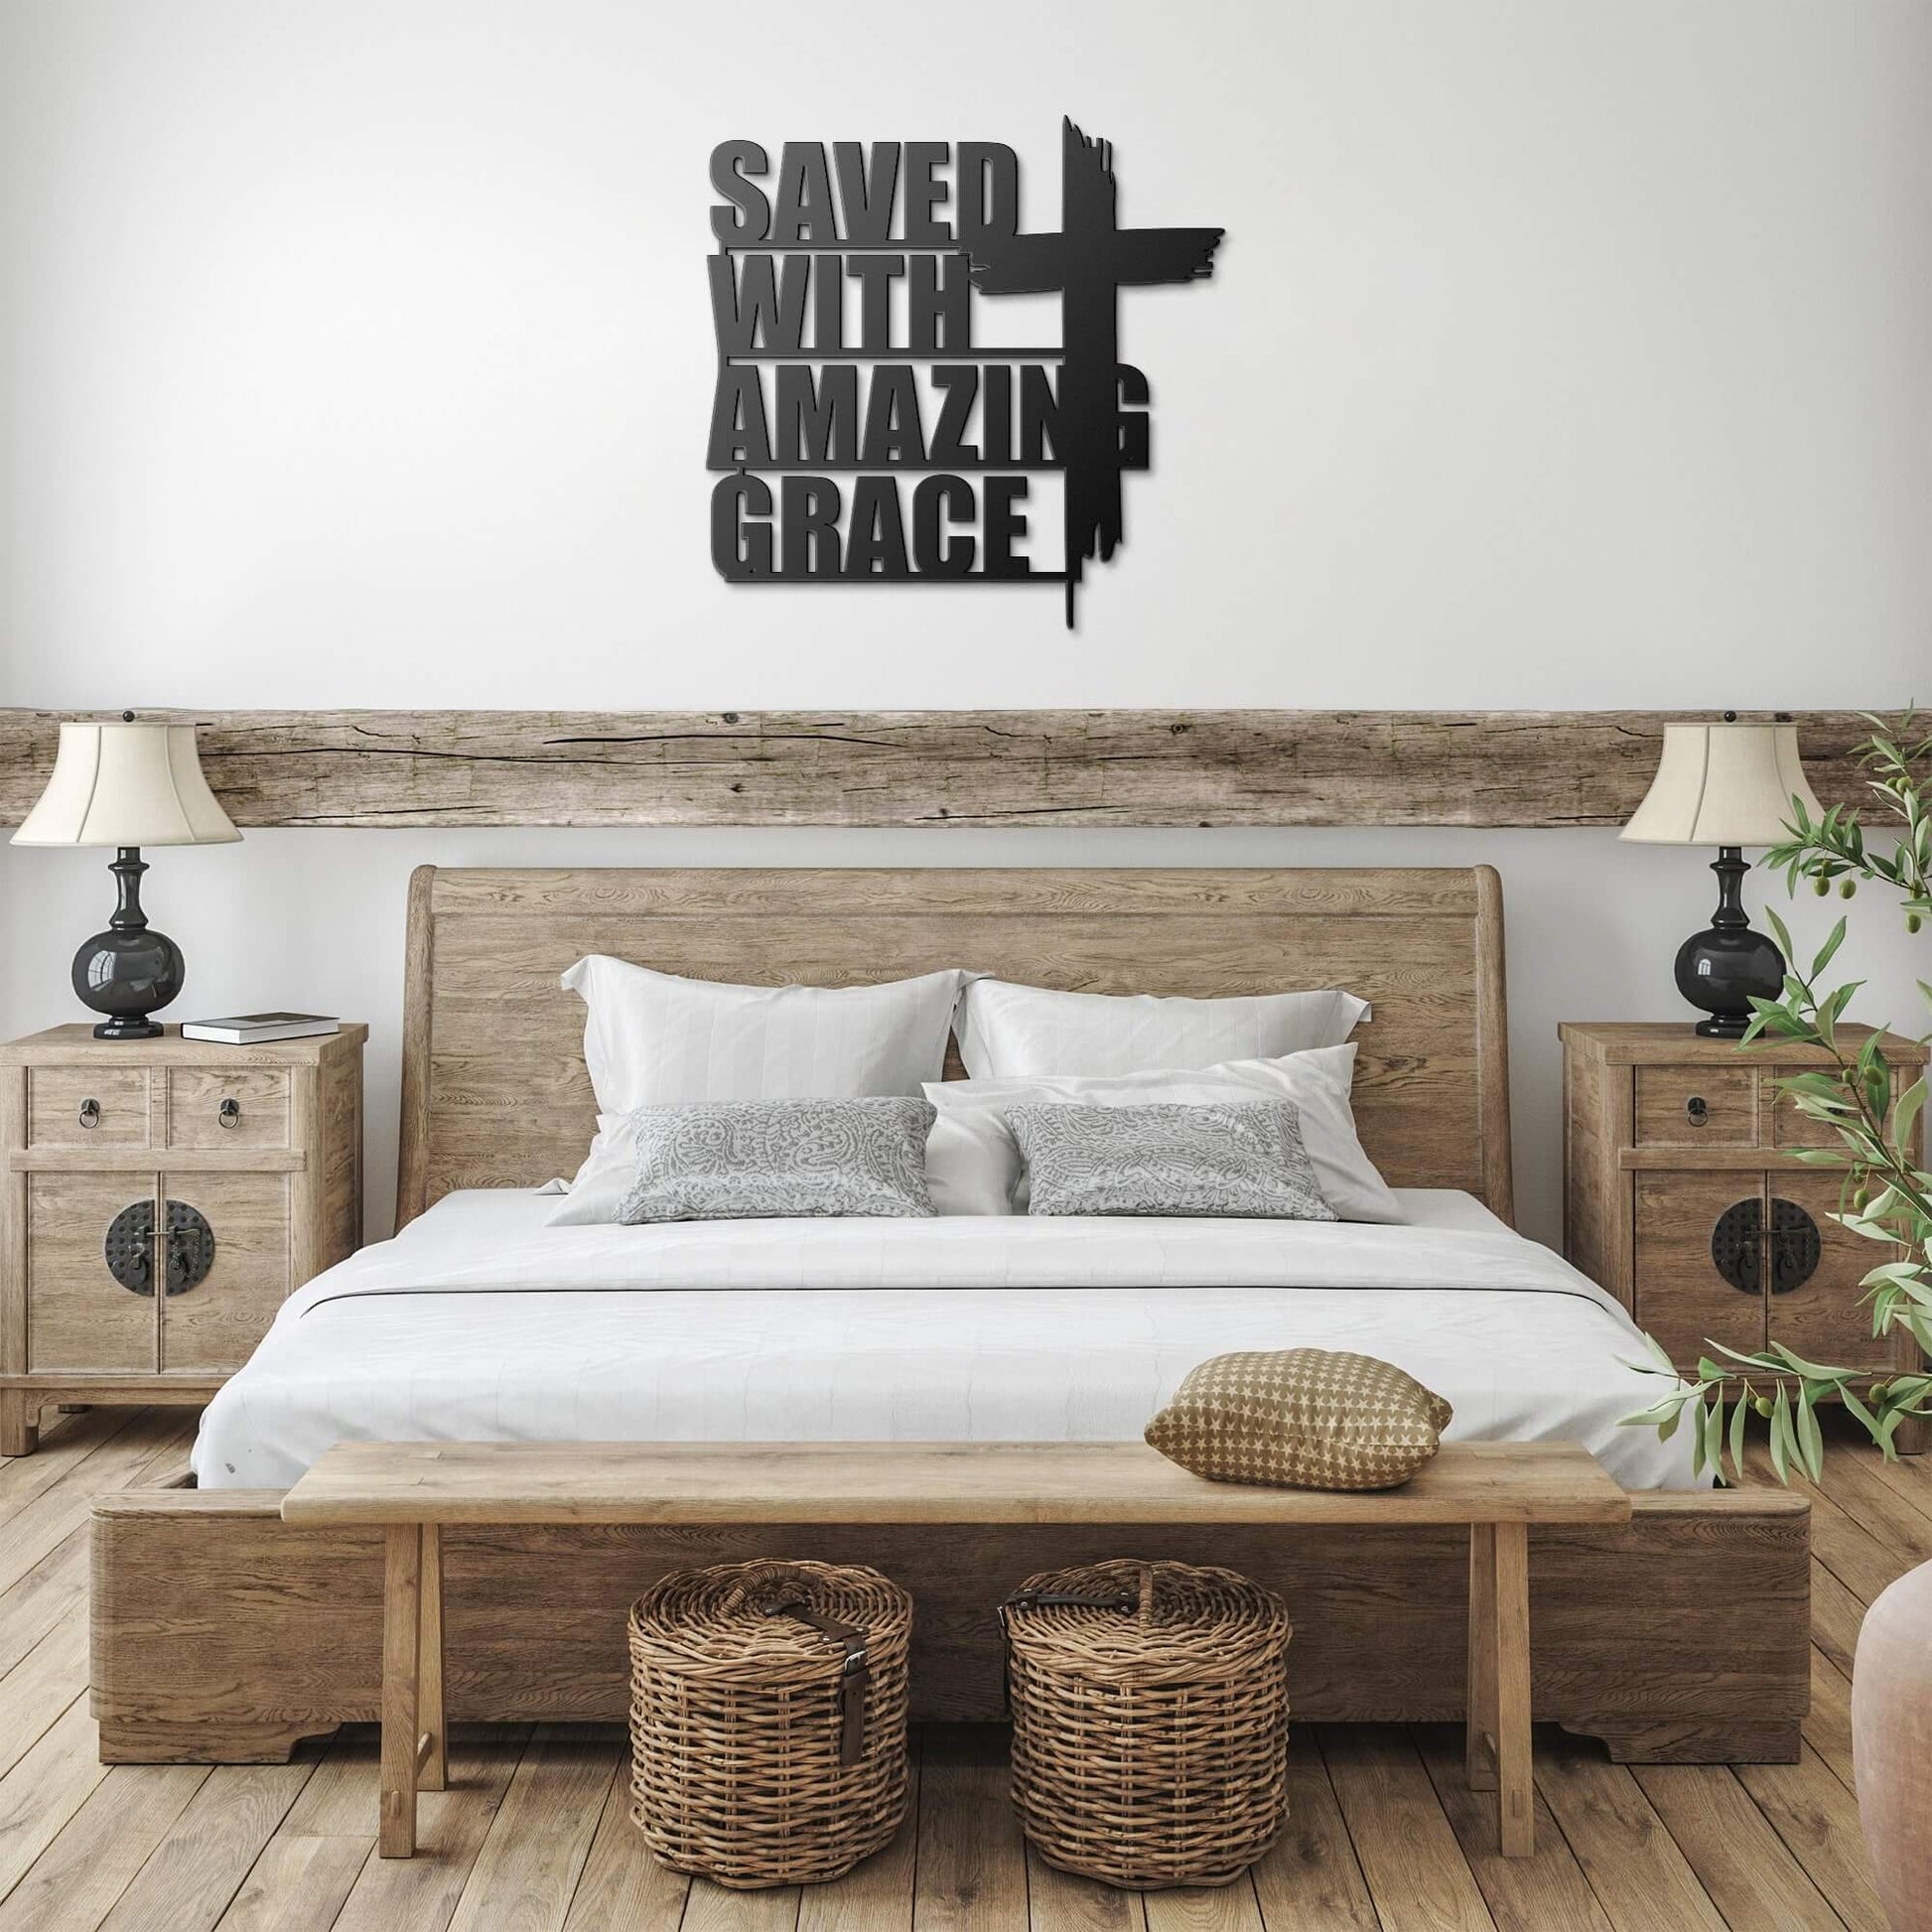 Saved With Amazing Grace Metal Sign - Christian Metal Wall Art - Religious Metal Wall Decor